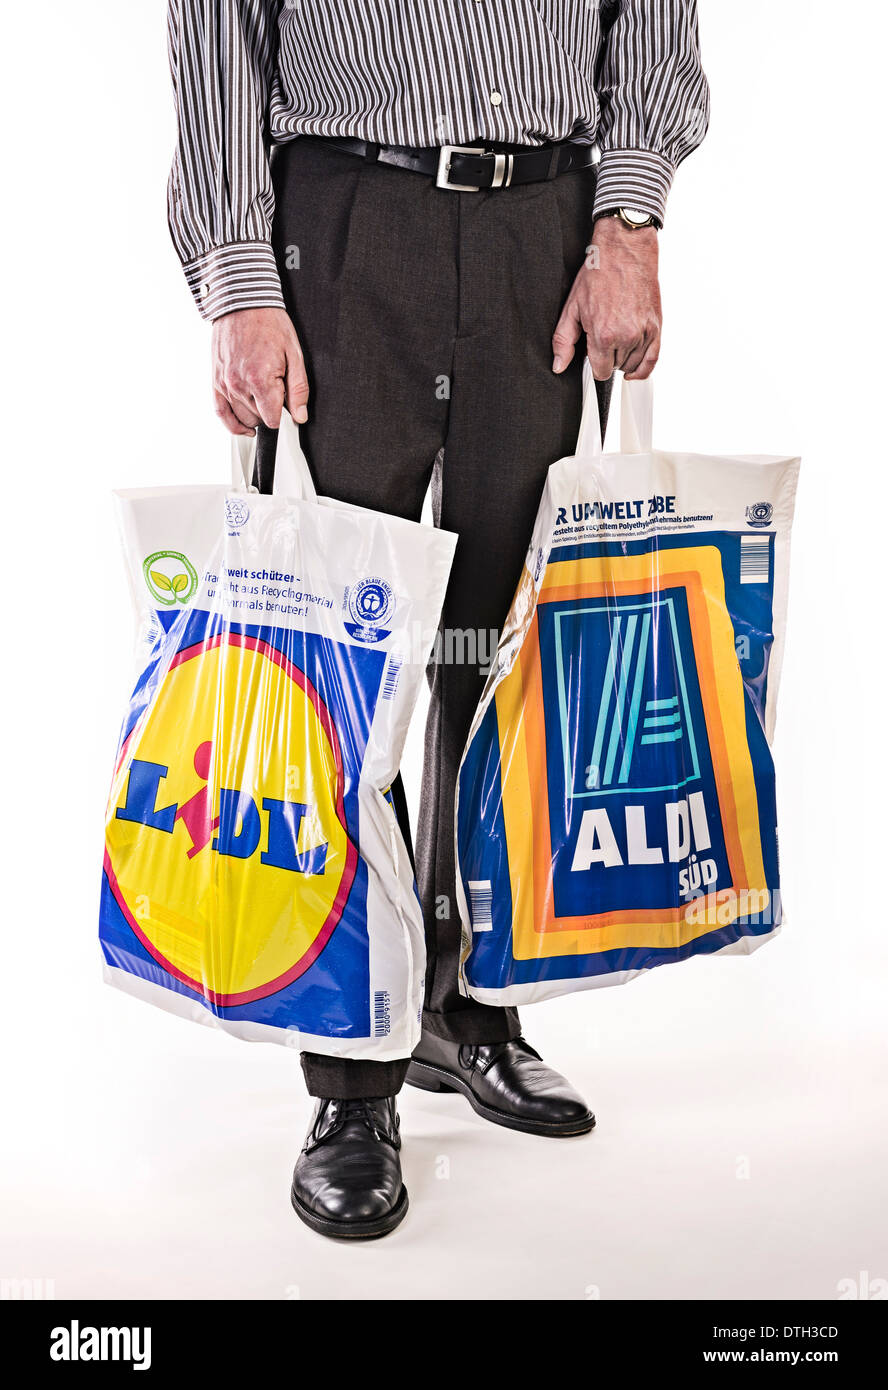 Lower body of a man in a suit, carrying plastic bags of discounters Lidl and Aldi. Stock Photo